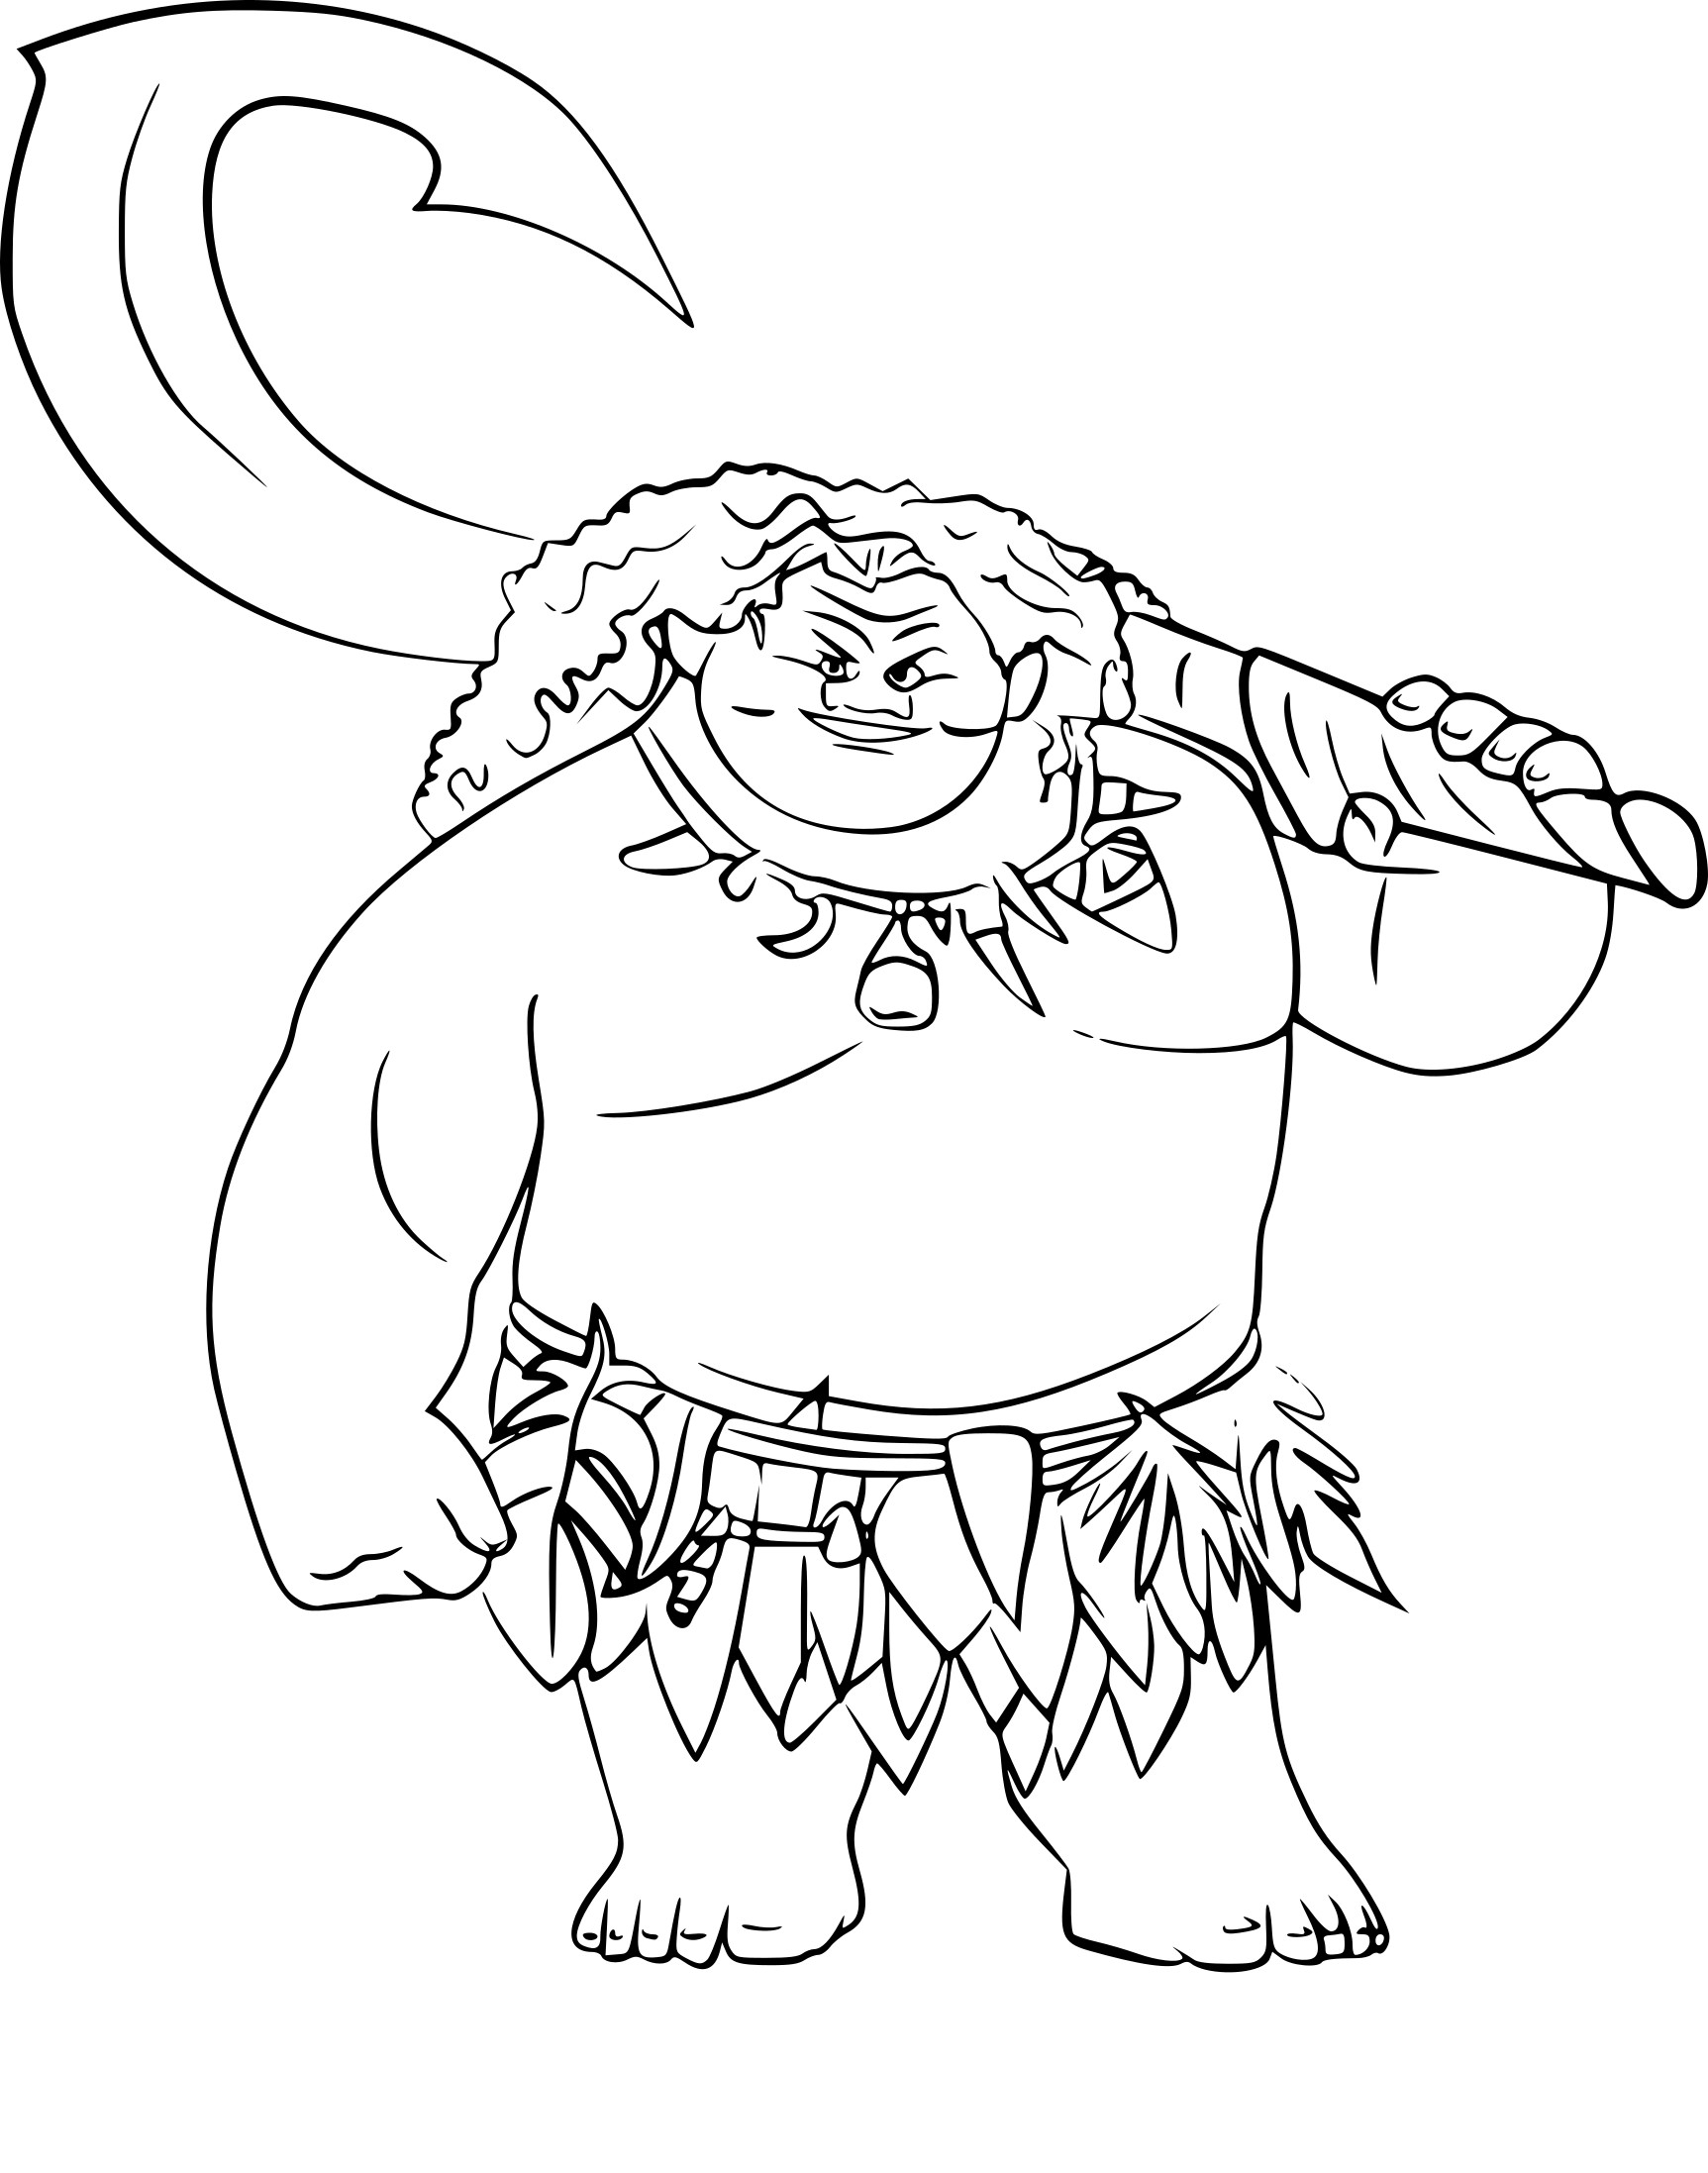 Maui Coloring Pages at GetDrawings | Free download